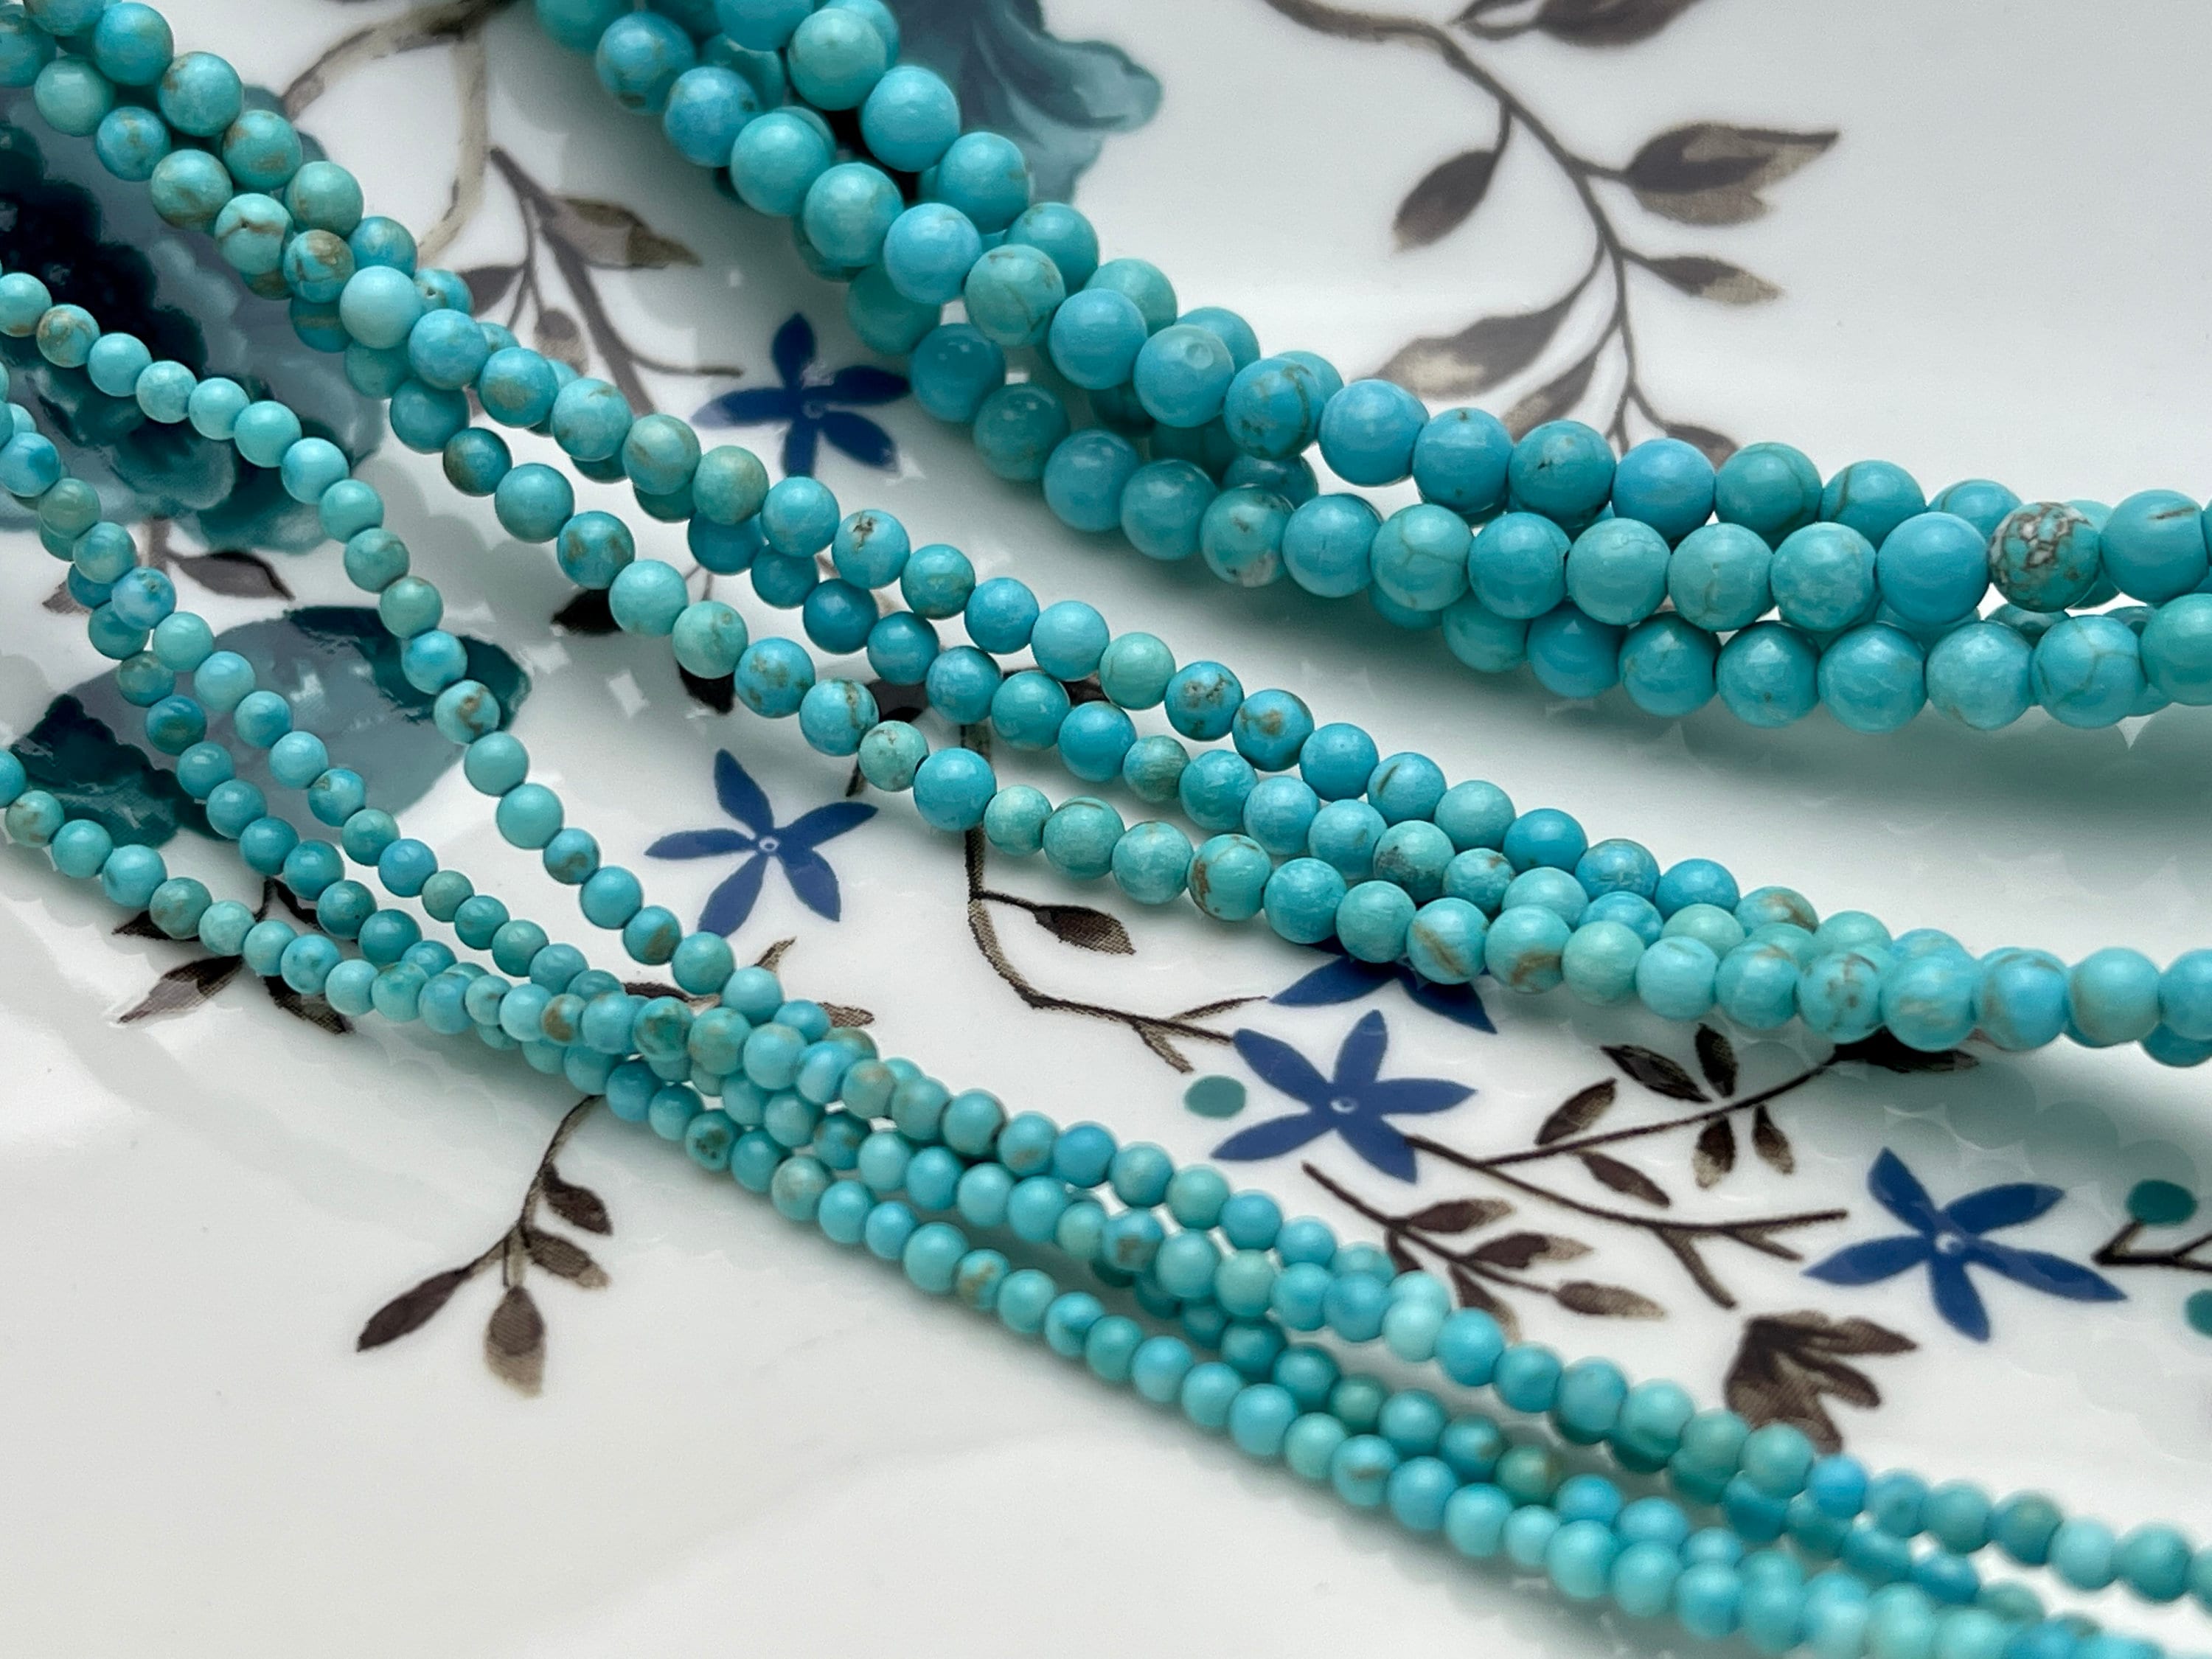 2mm 3mm 4mm Smooth Round Turquoise Gemstone Beads 15.5 Inches Strand #4179